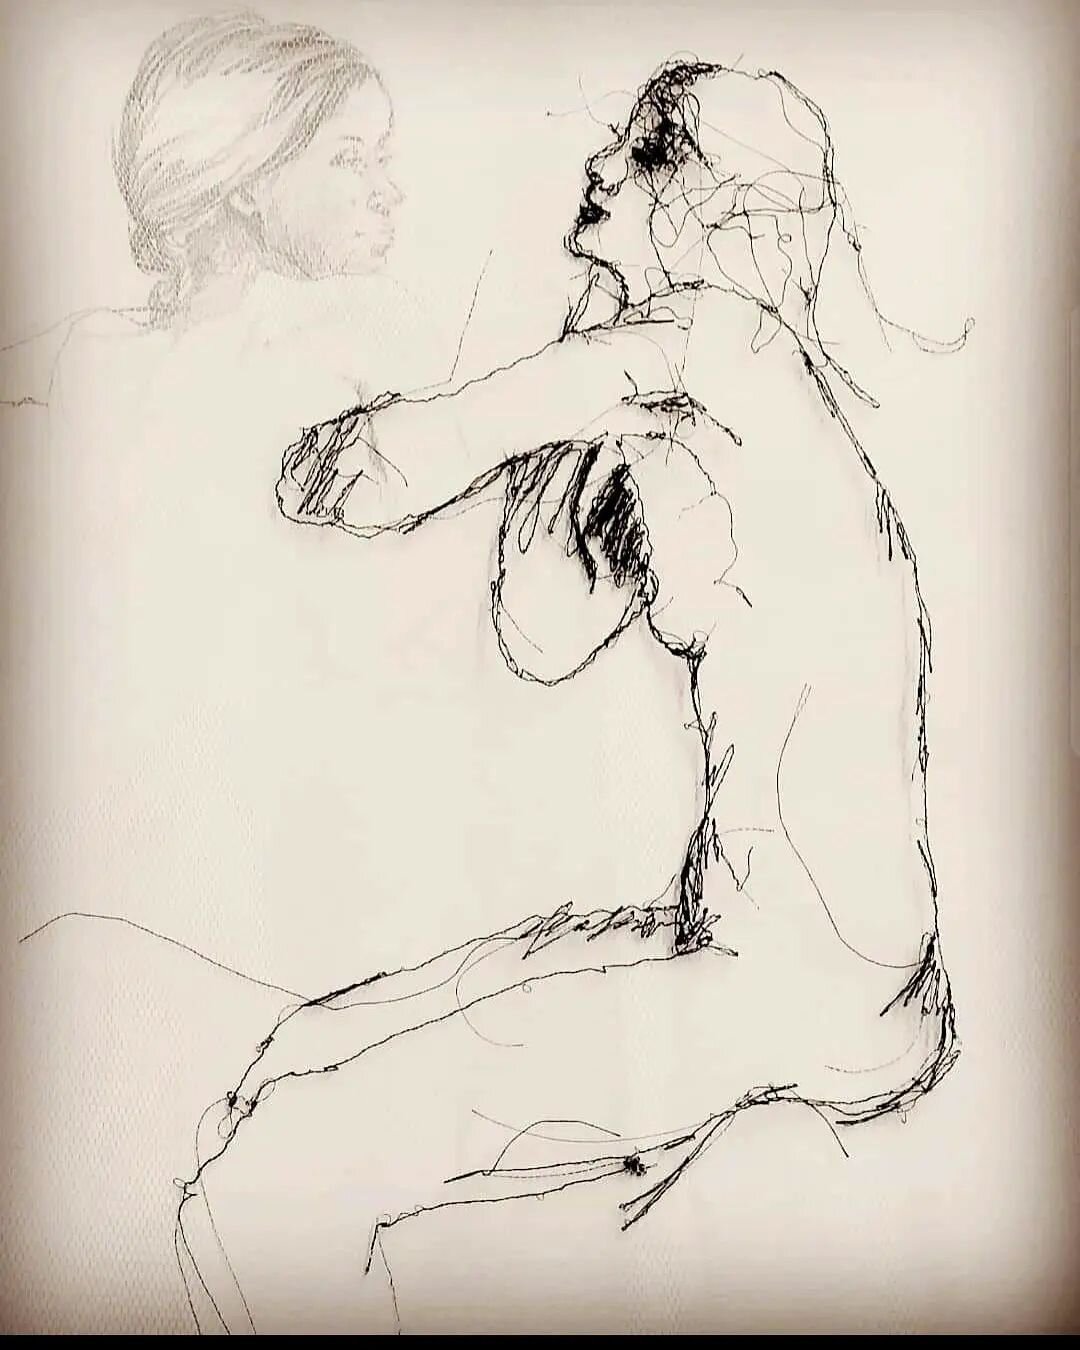 Title: Coupling. 
Stitch &amp; graphite on mesh &amp;  paper.
Images of earlier work, more women for international women's this week. Drawings from live models, the best way to draw 😎

#lifedrawing drawing #iwd #stitcheddrawing #BernieLeahyArt #iris